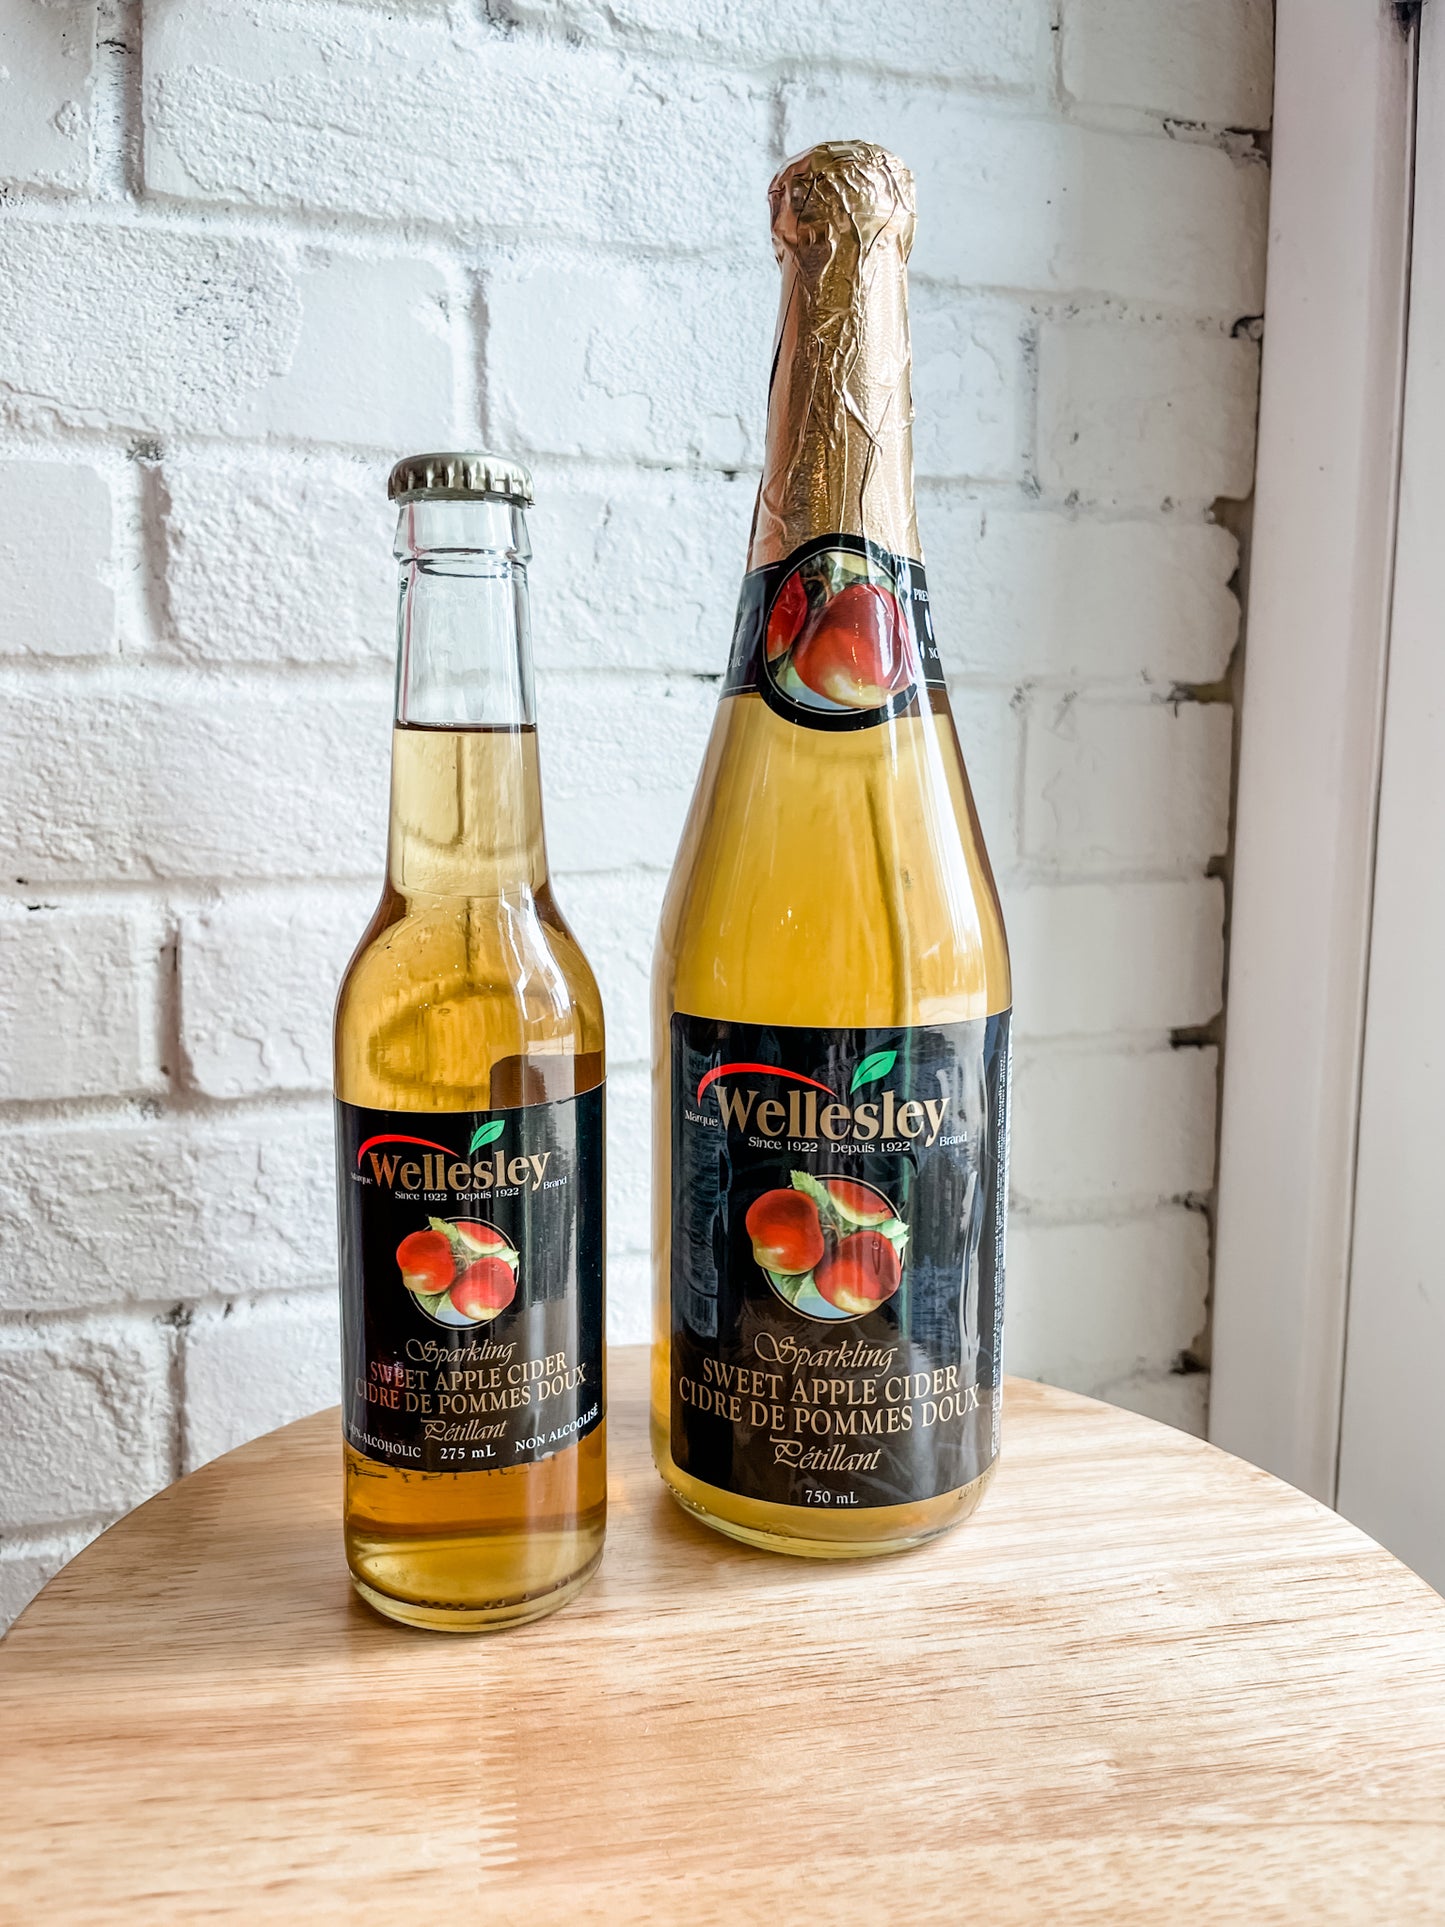 Wellesley Sparkling Non-Alcoholic Sweet Apple Cider 275ml - No Added Sugar & Preservative Free